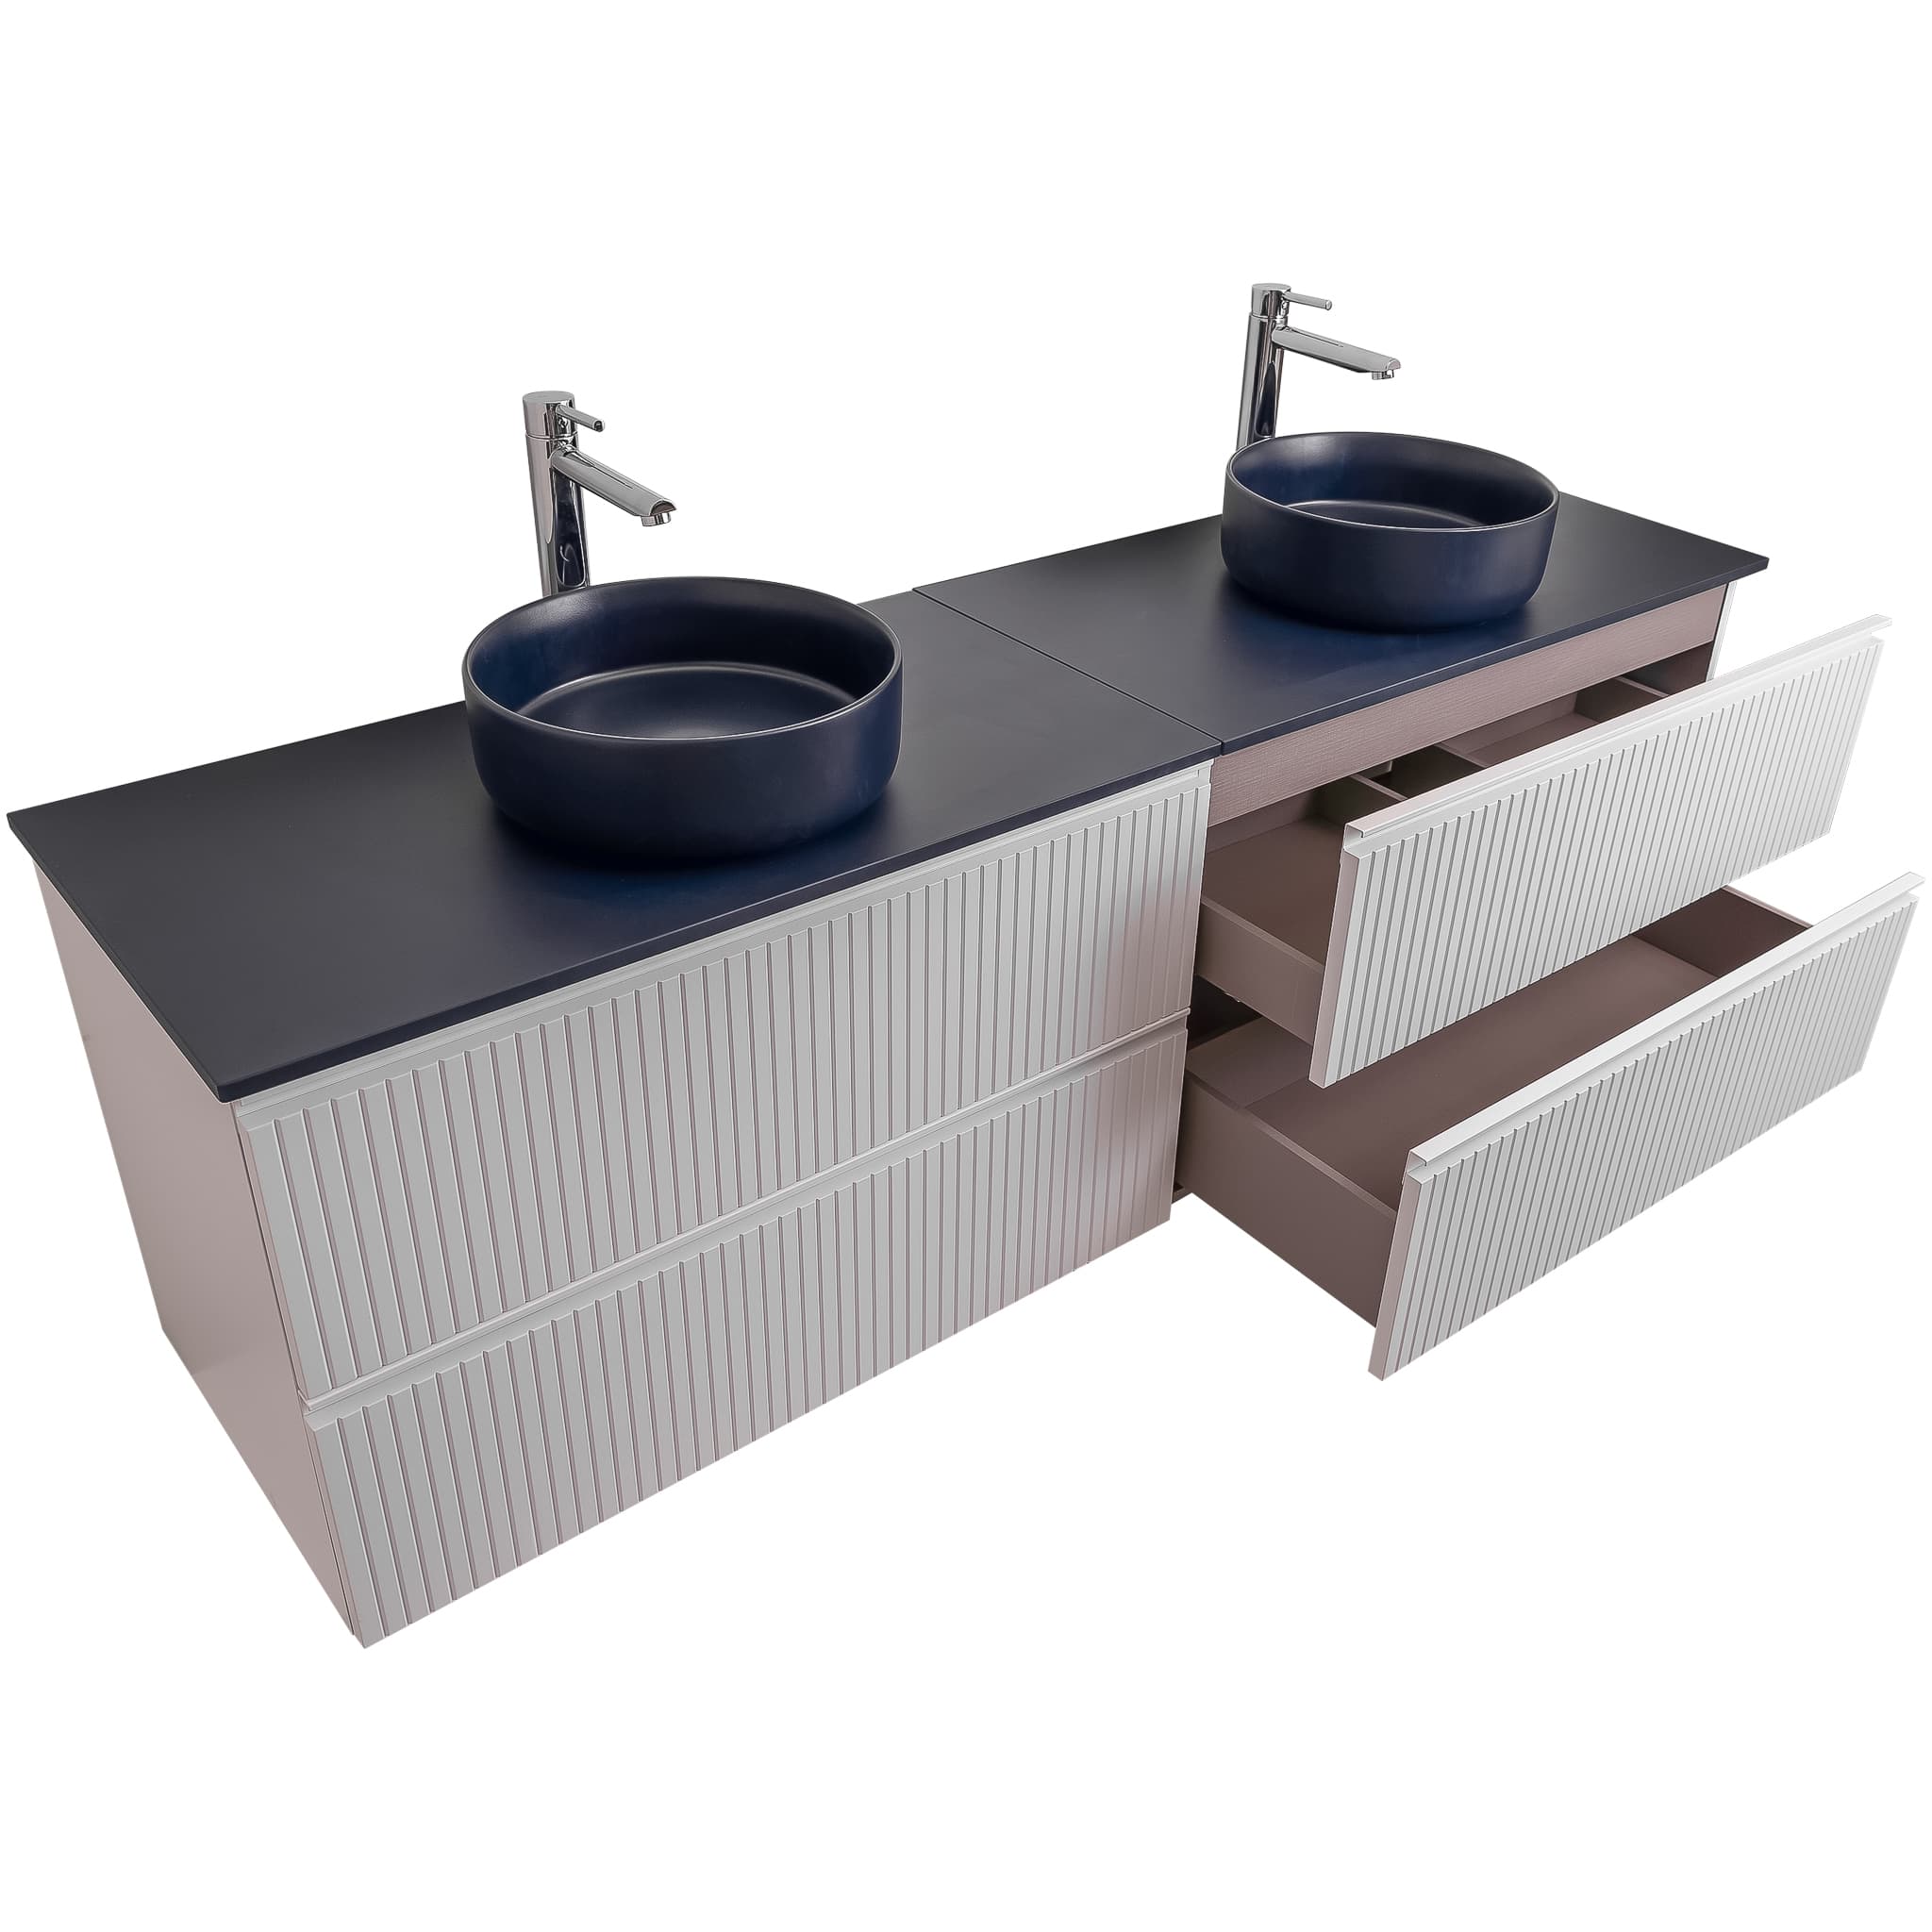 Ares 72 Matte White Cabinet, Ares Navy Blue Top And Two Ares Navy Blue Ceramic Basin, Wall Mounted Modern Vanity Set